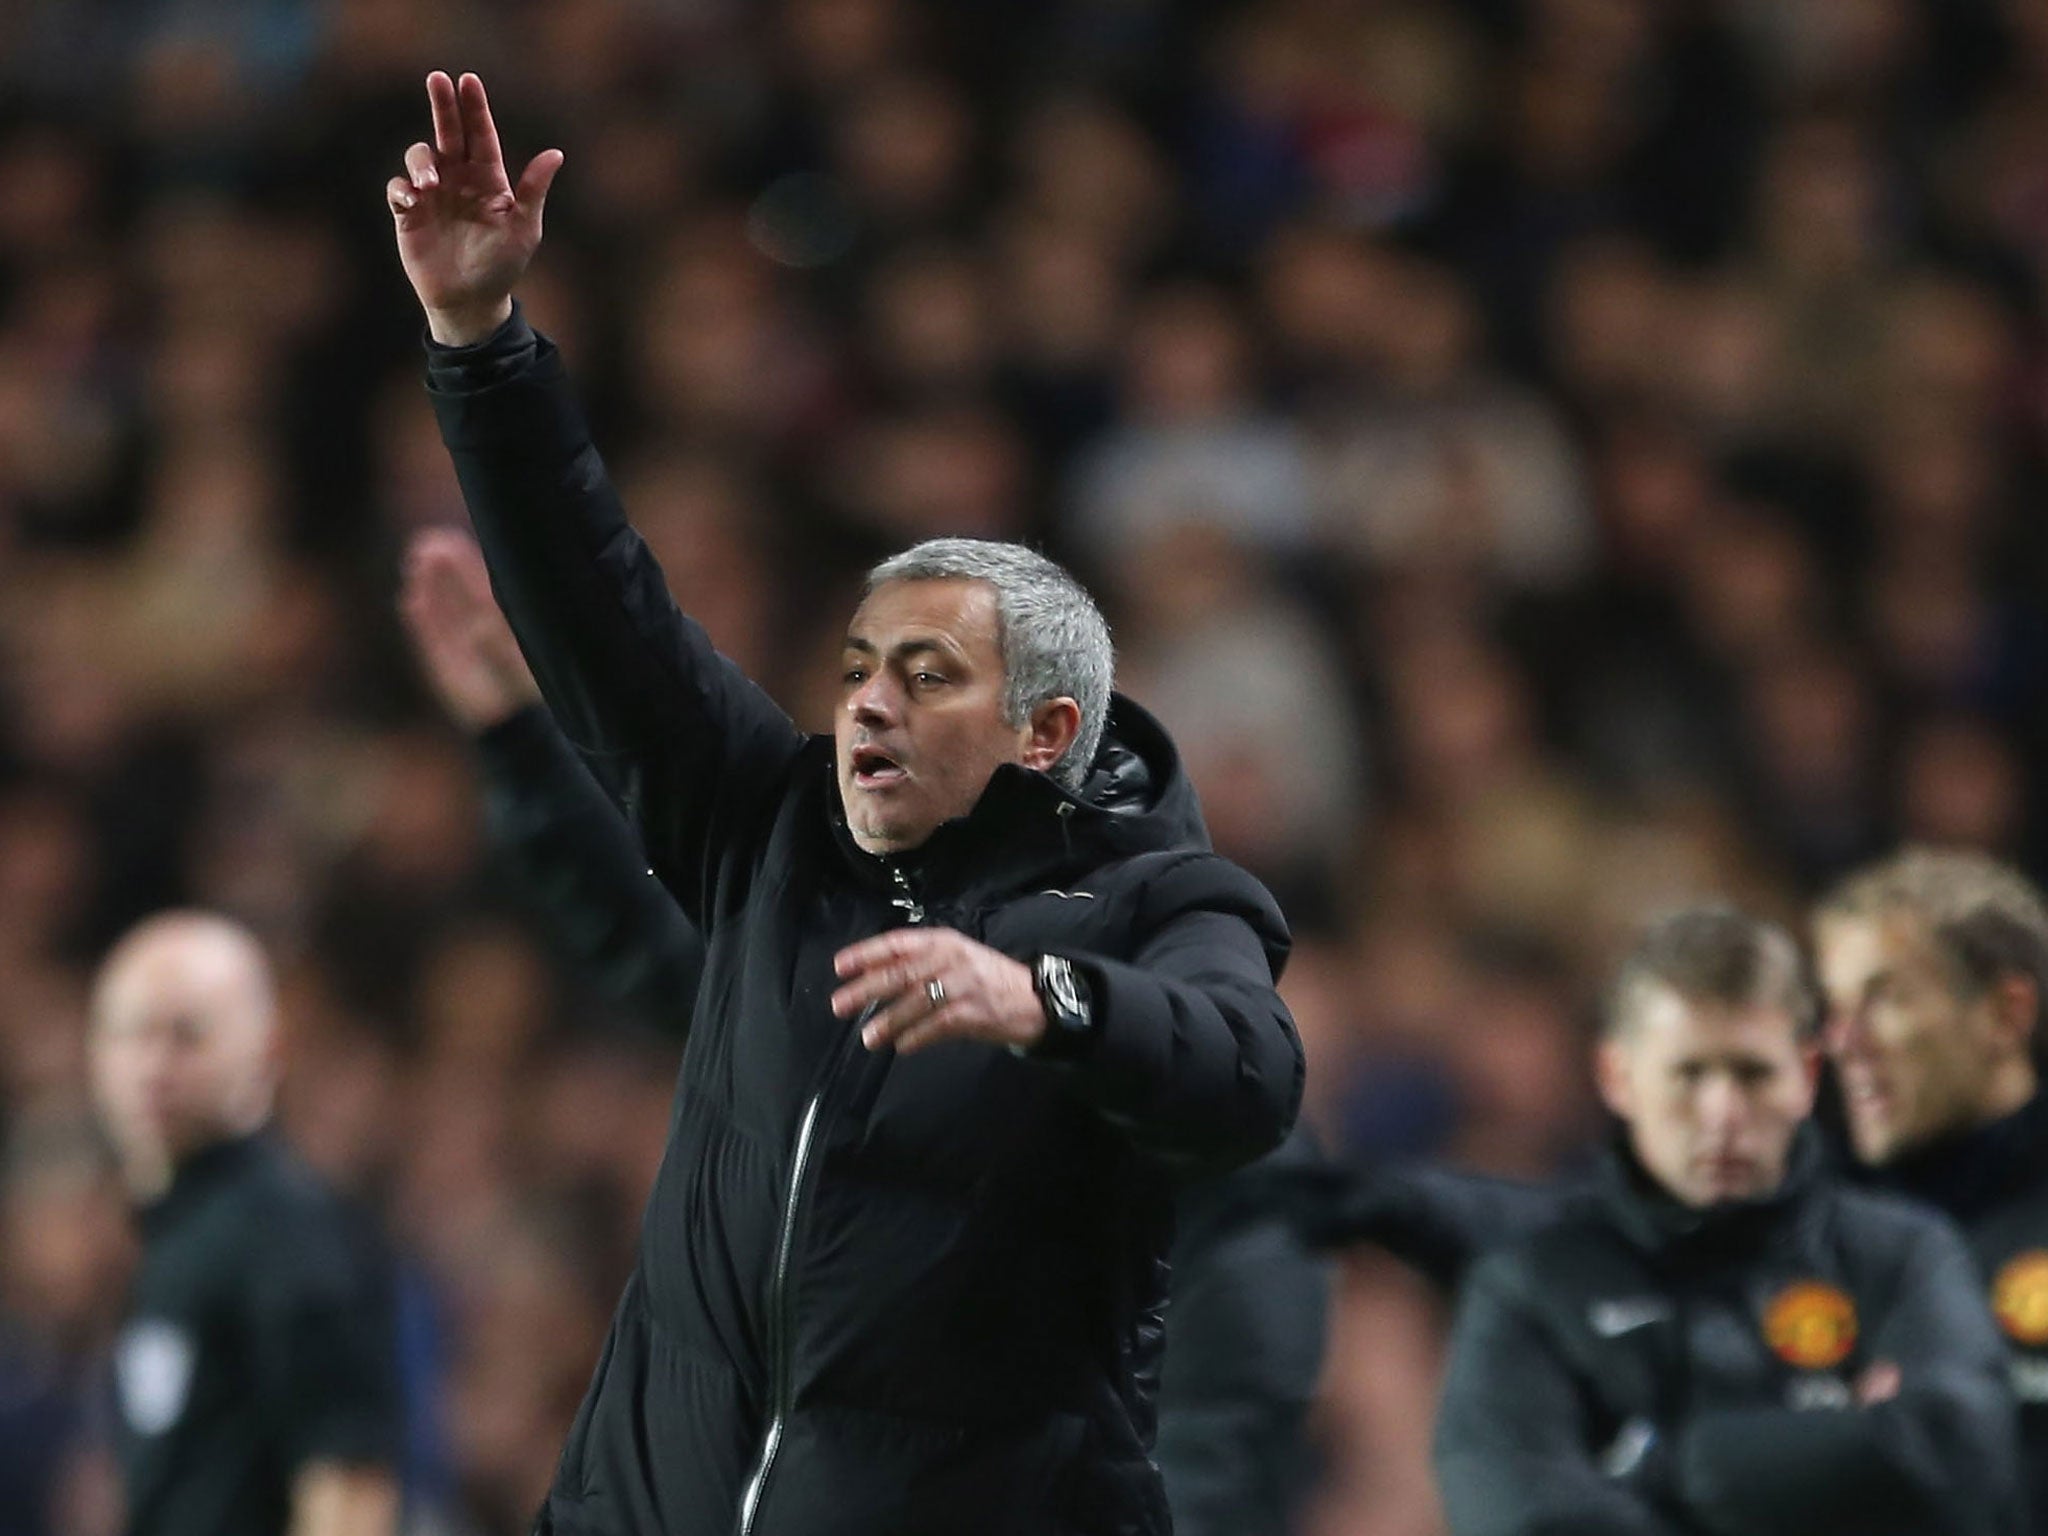 Jose Mourinho makes a gesture from the touchline during Chelsea's 3-1 win over Man United on Sunday